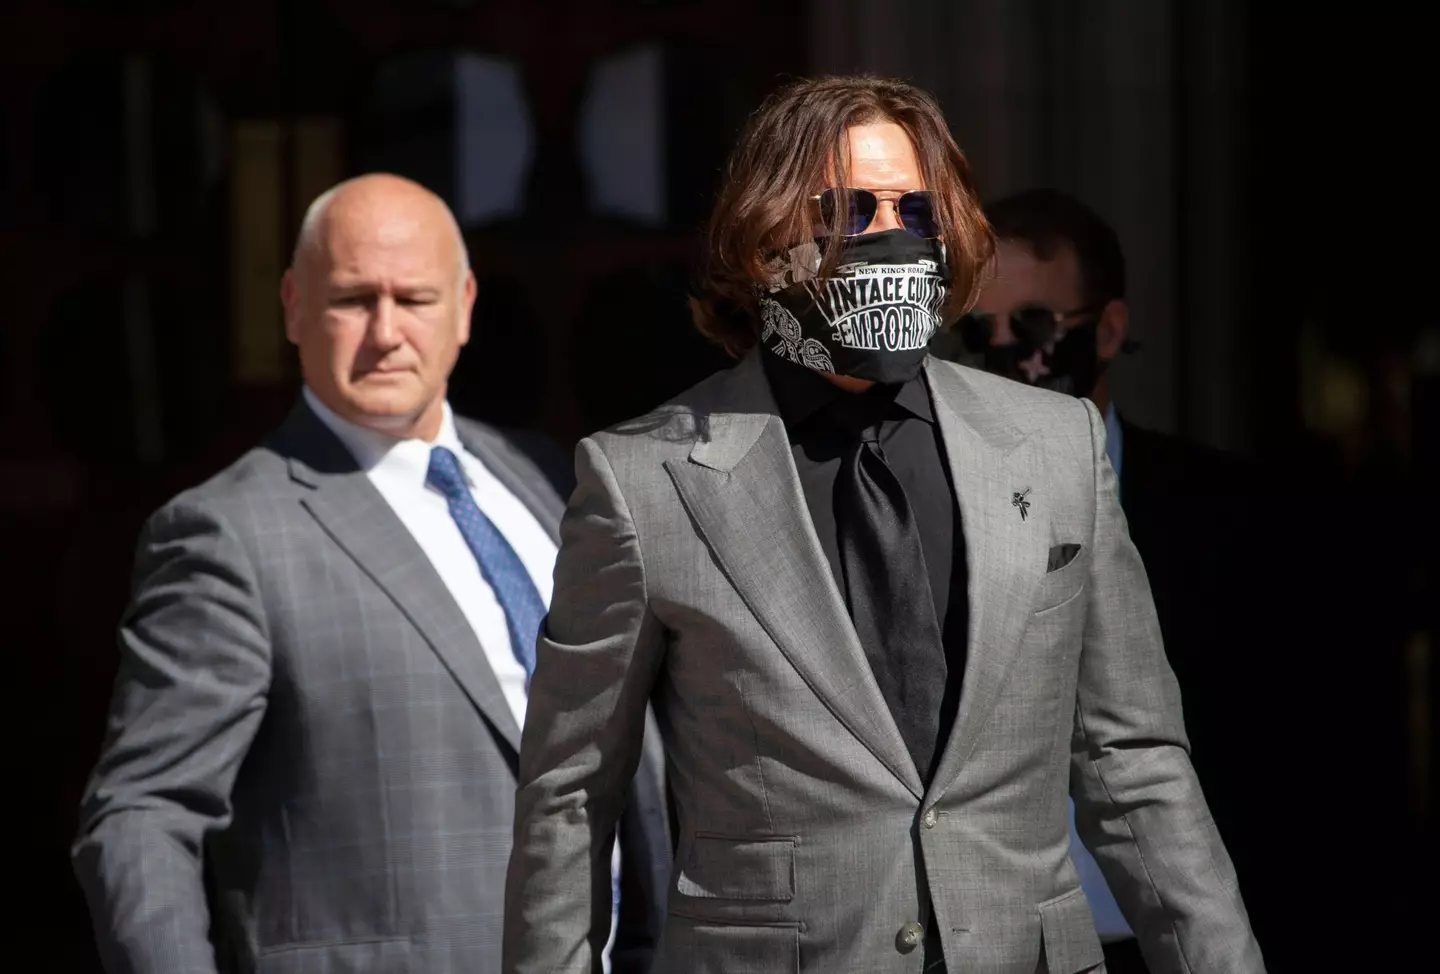 Last year, Johnny Depp lost a libel trial against The Sun’s publisher (